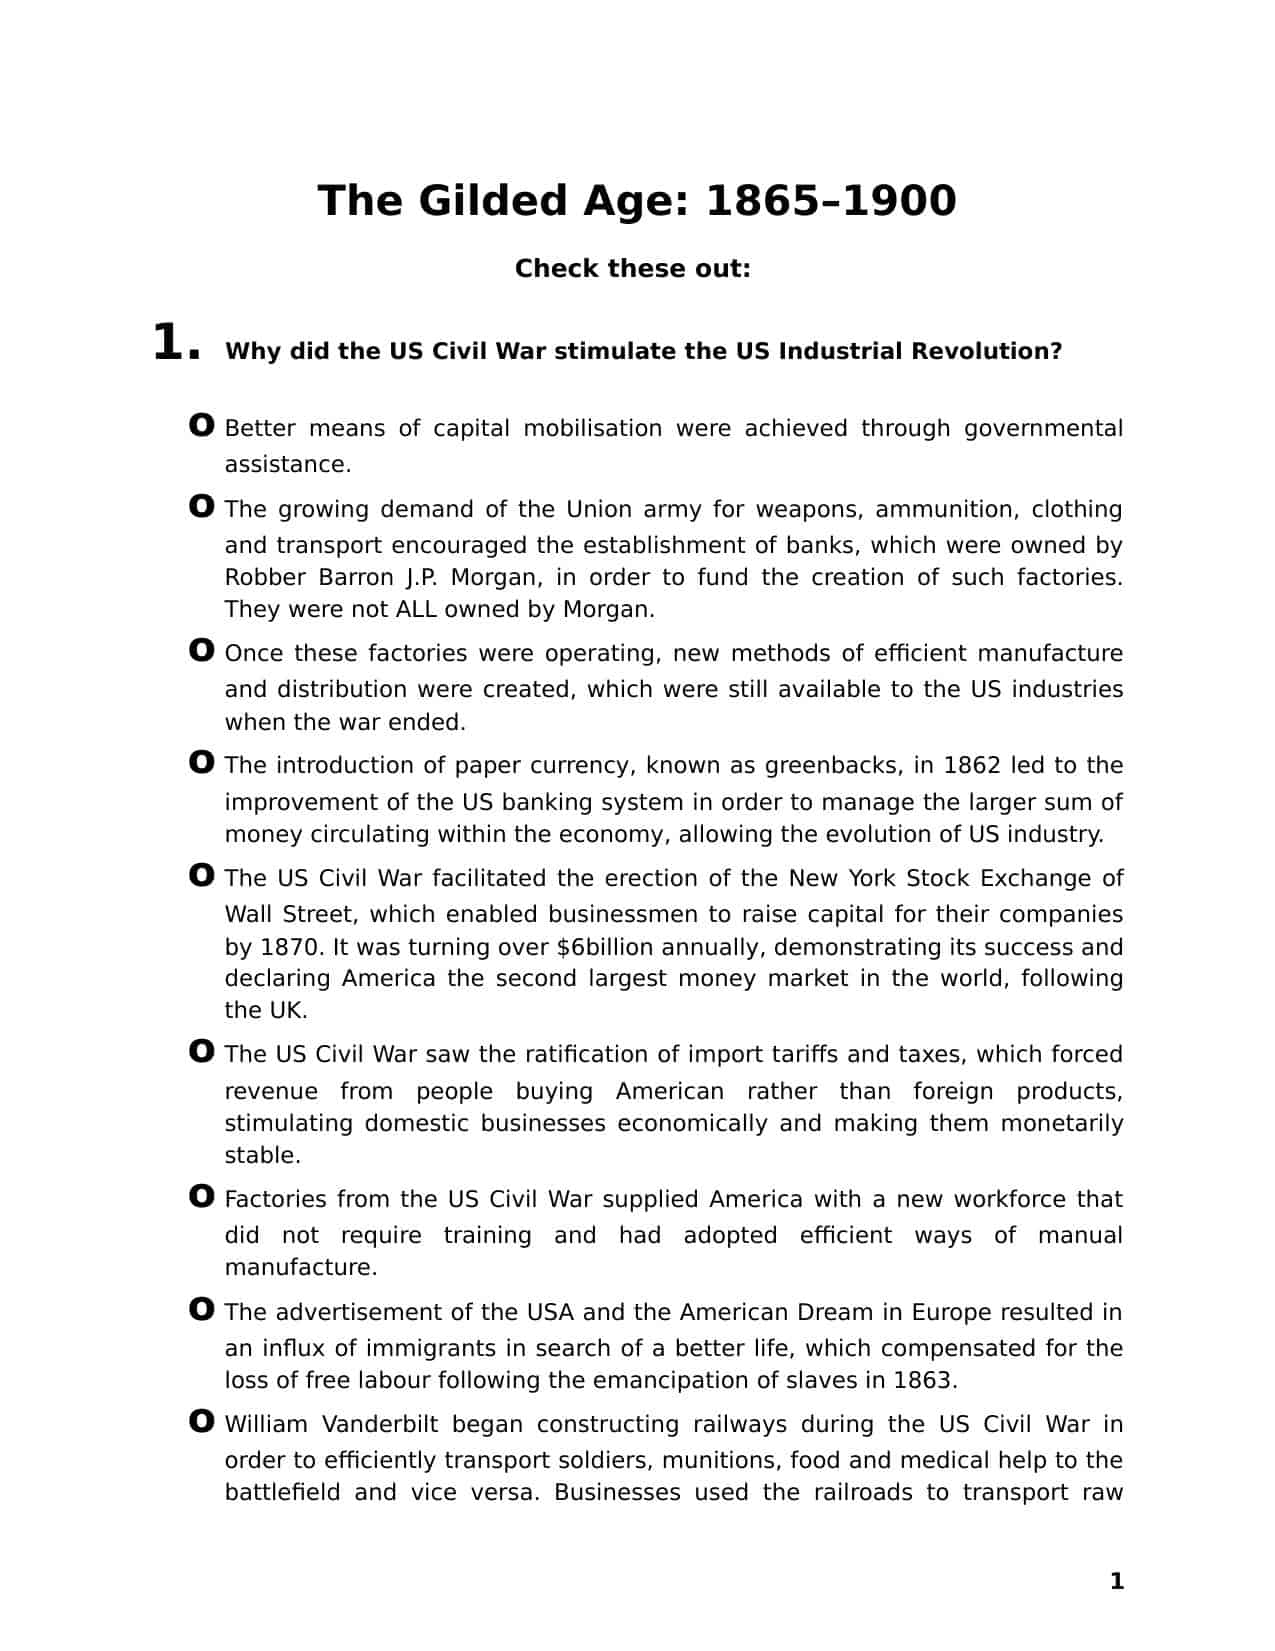 gilded-age-questions-worksheet